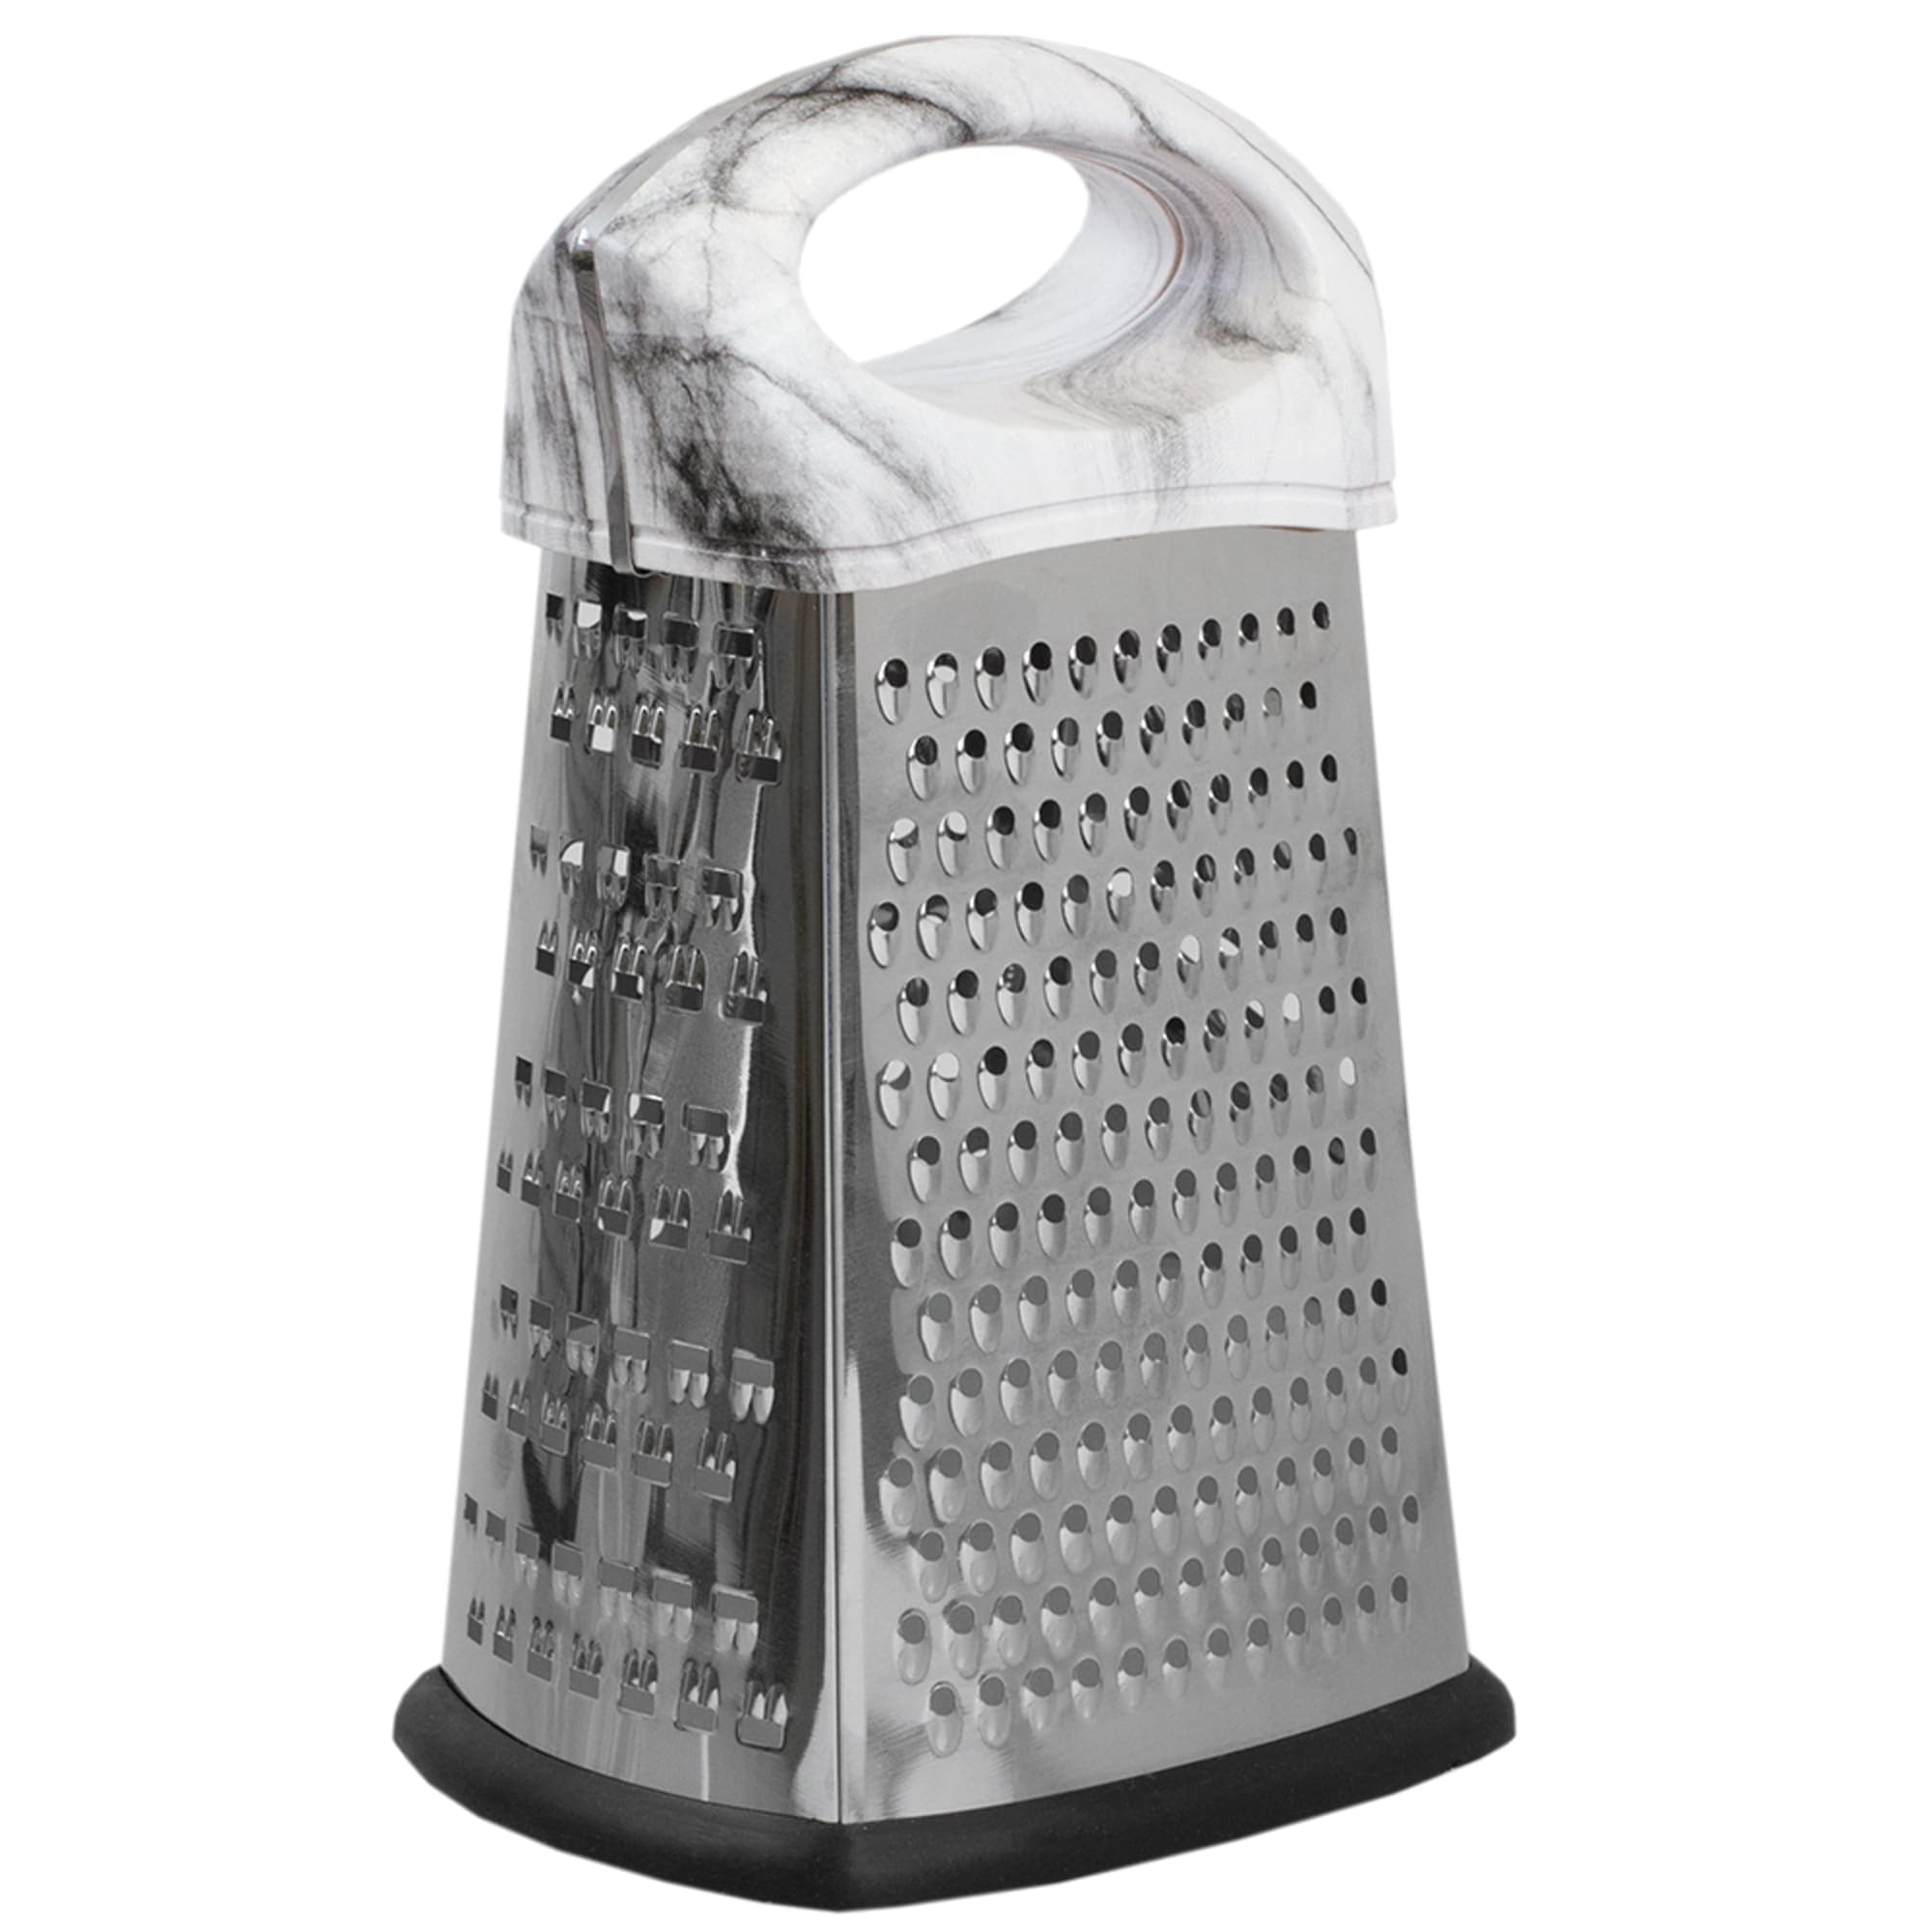 Home Basics 4 Sided Stainless Steel Cheese Grater with Faux Marble Handle $4.00 EACH, CASE PACK OF 24